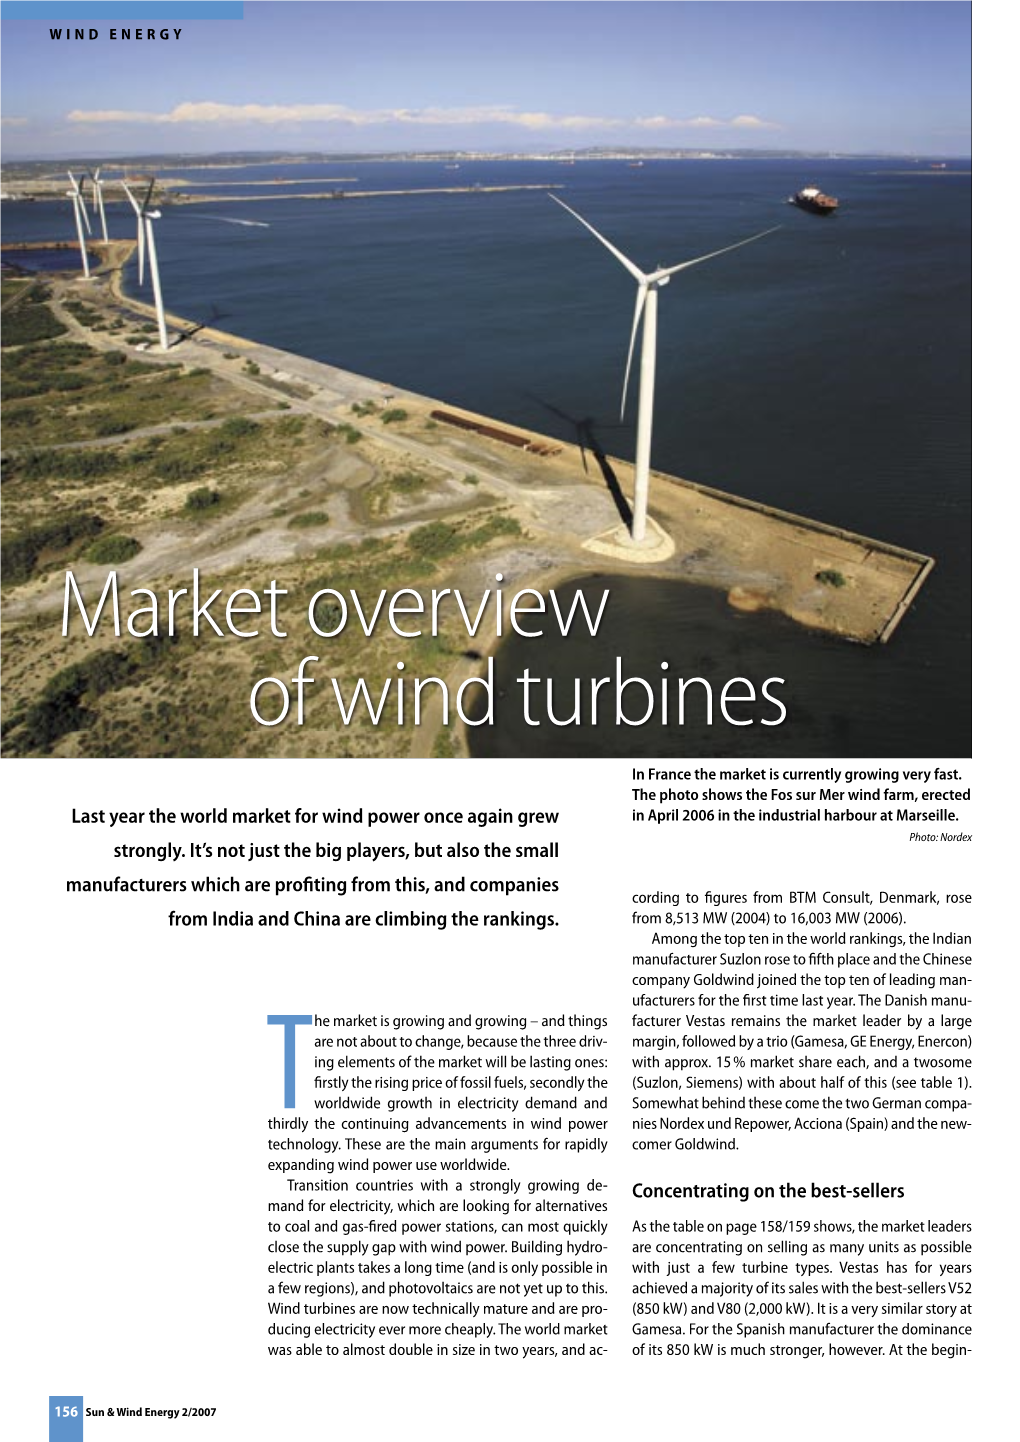 Market Overview of Wind Turbines